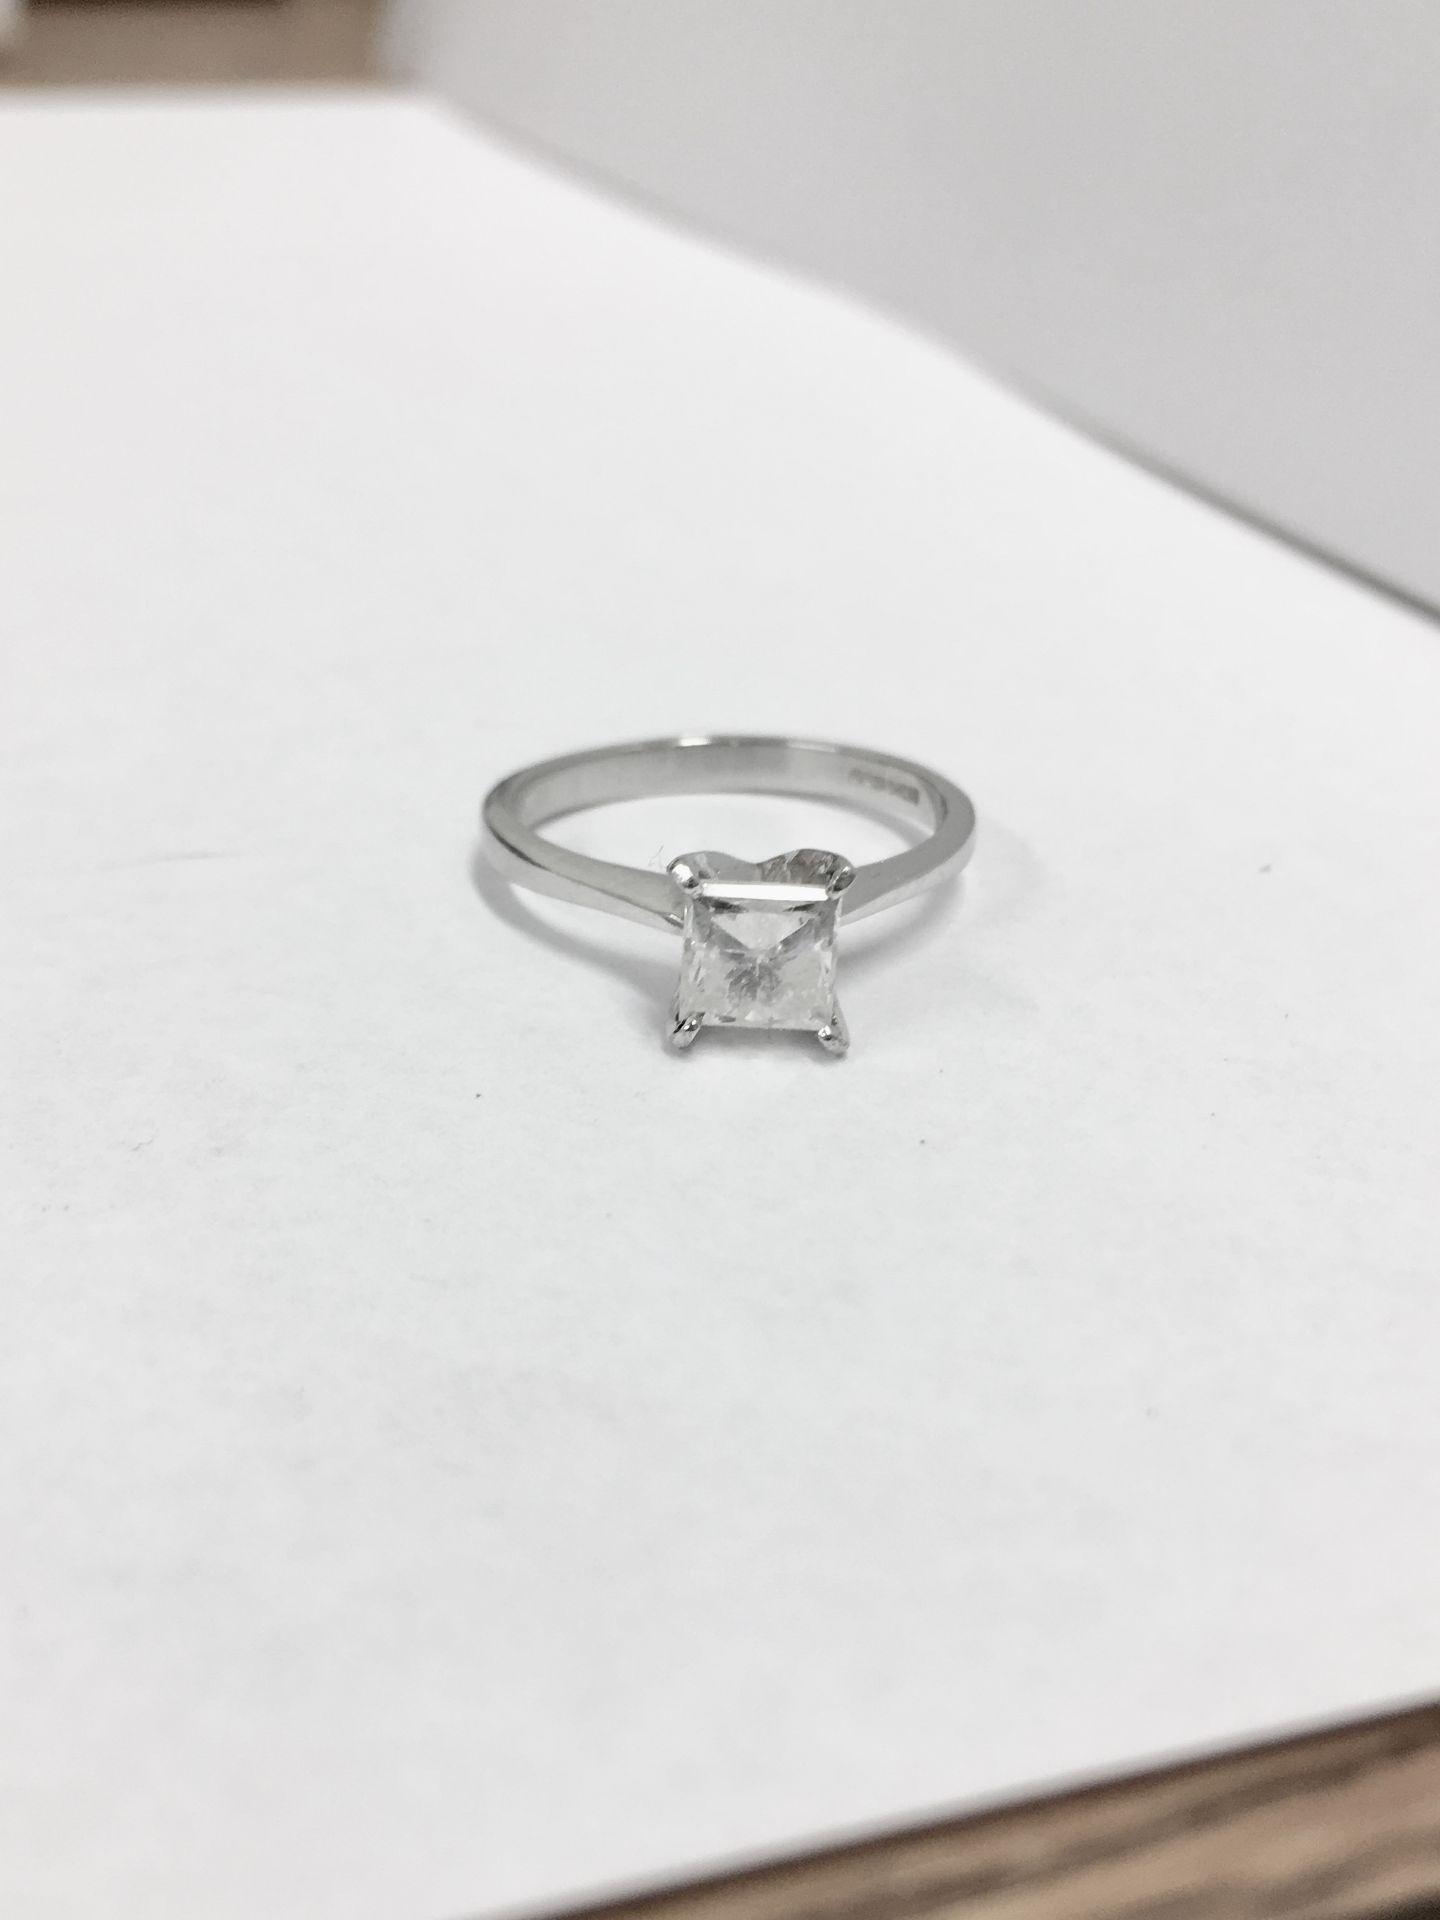 1.09Ct Diamond Solitaire Ring Set With A Princess Cut Diamond. - Image 9 of 9